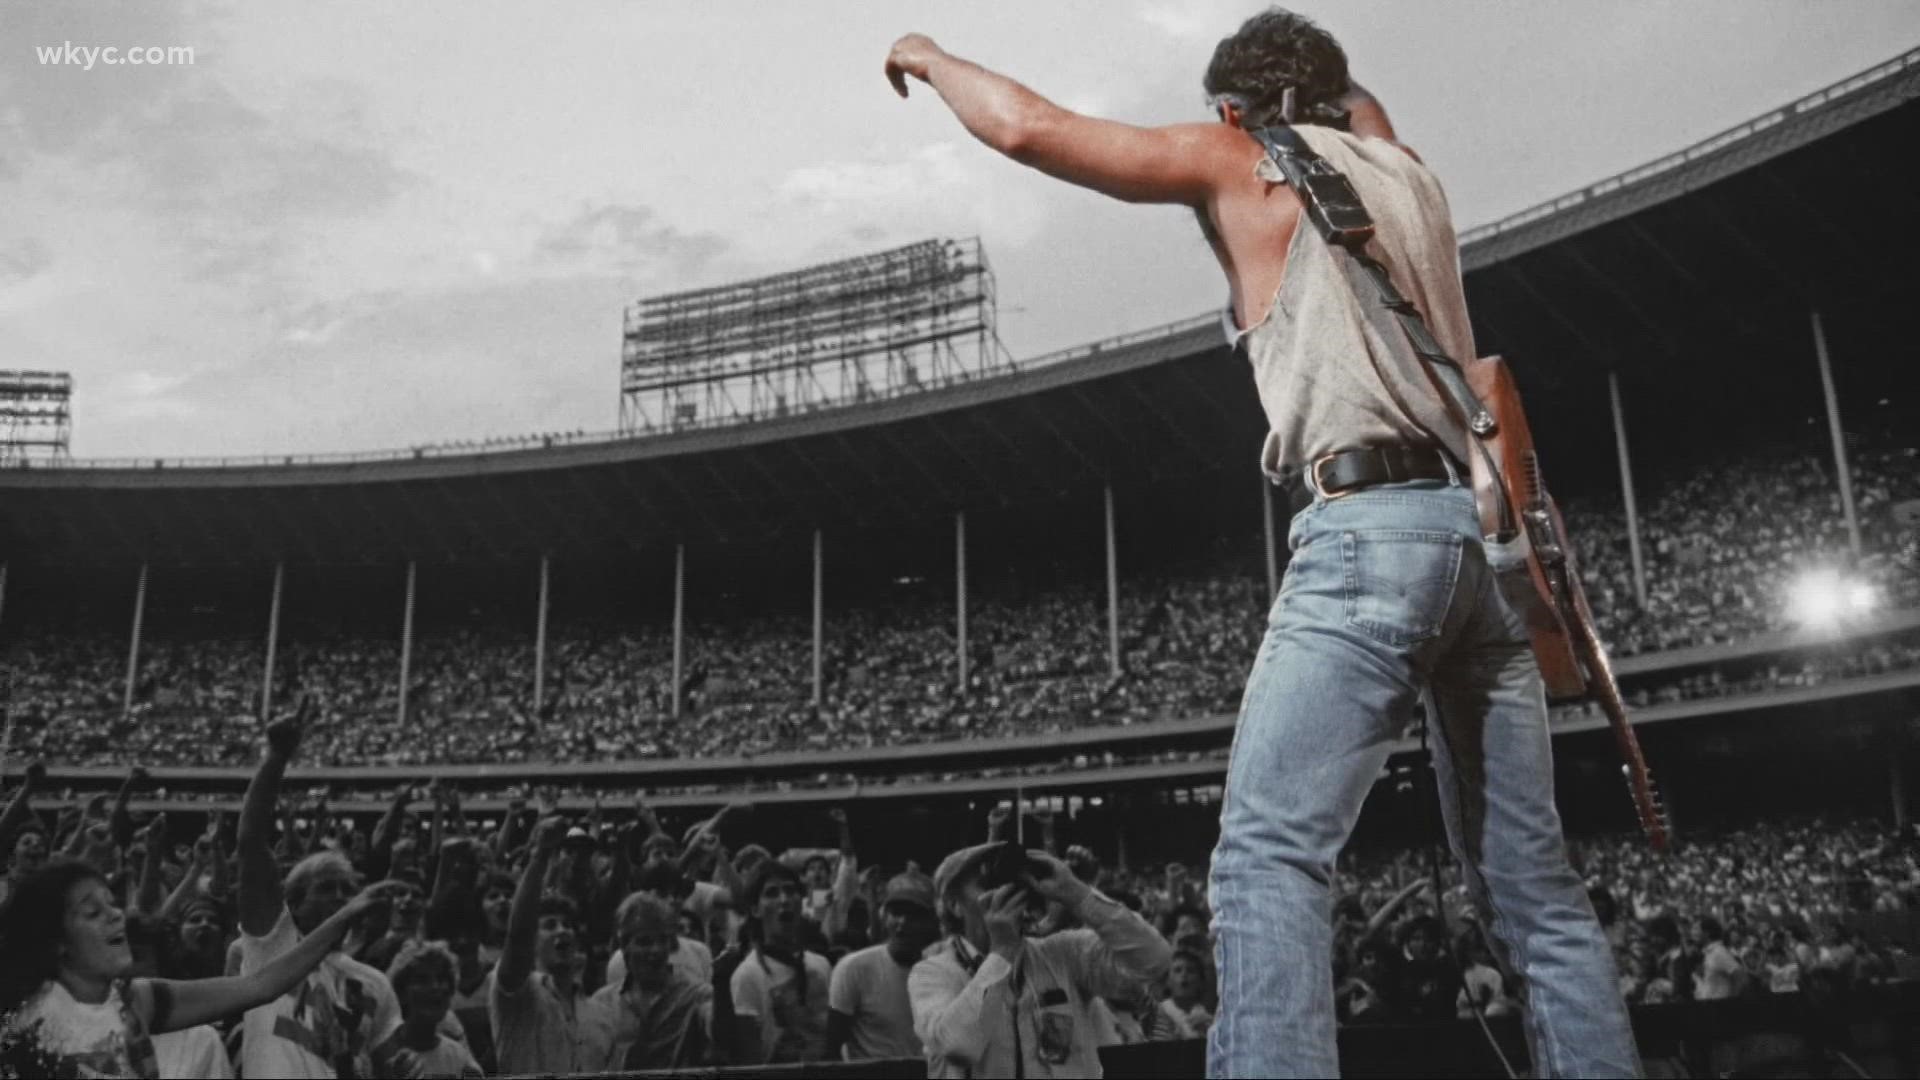 Iconic rock 'n' roll photographer Janet Macoska has a new book titled "Bruce Springsteen: Live in the Heartland."